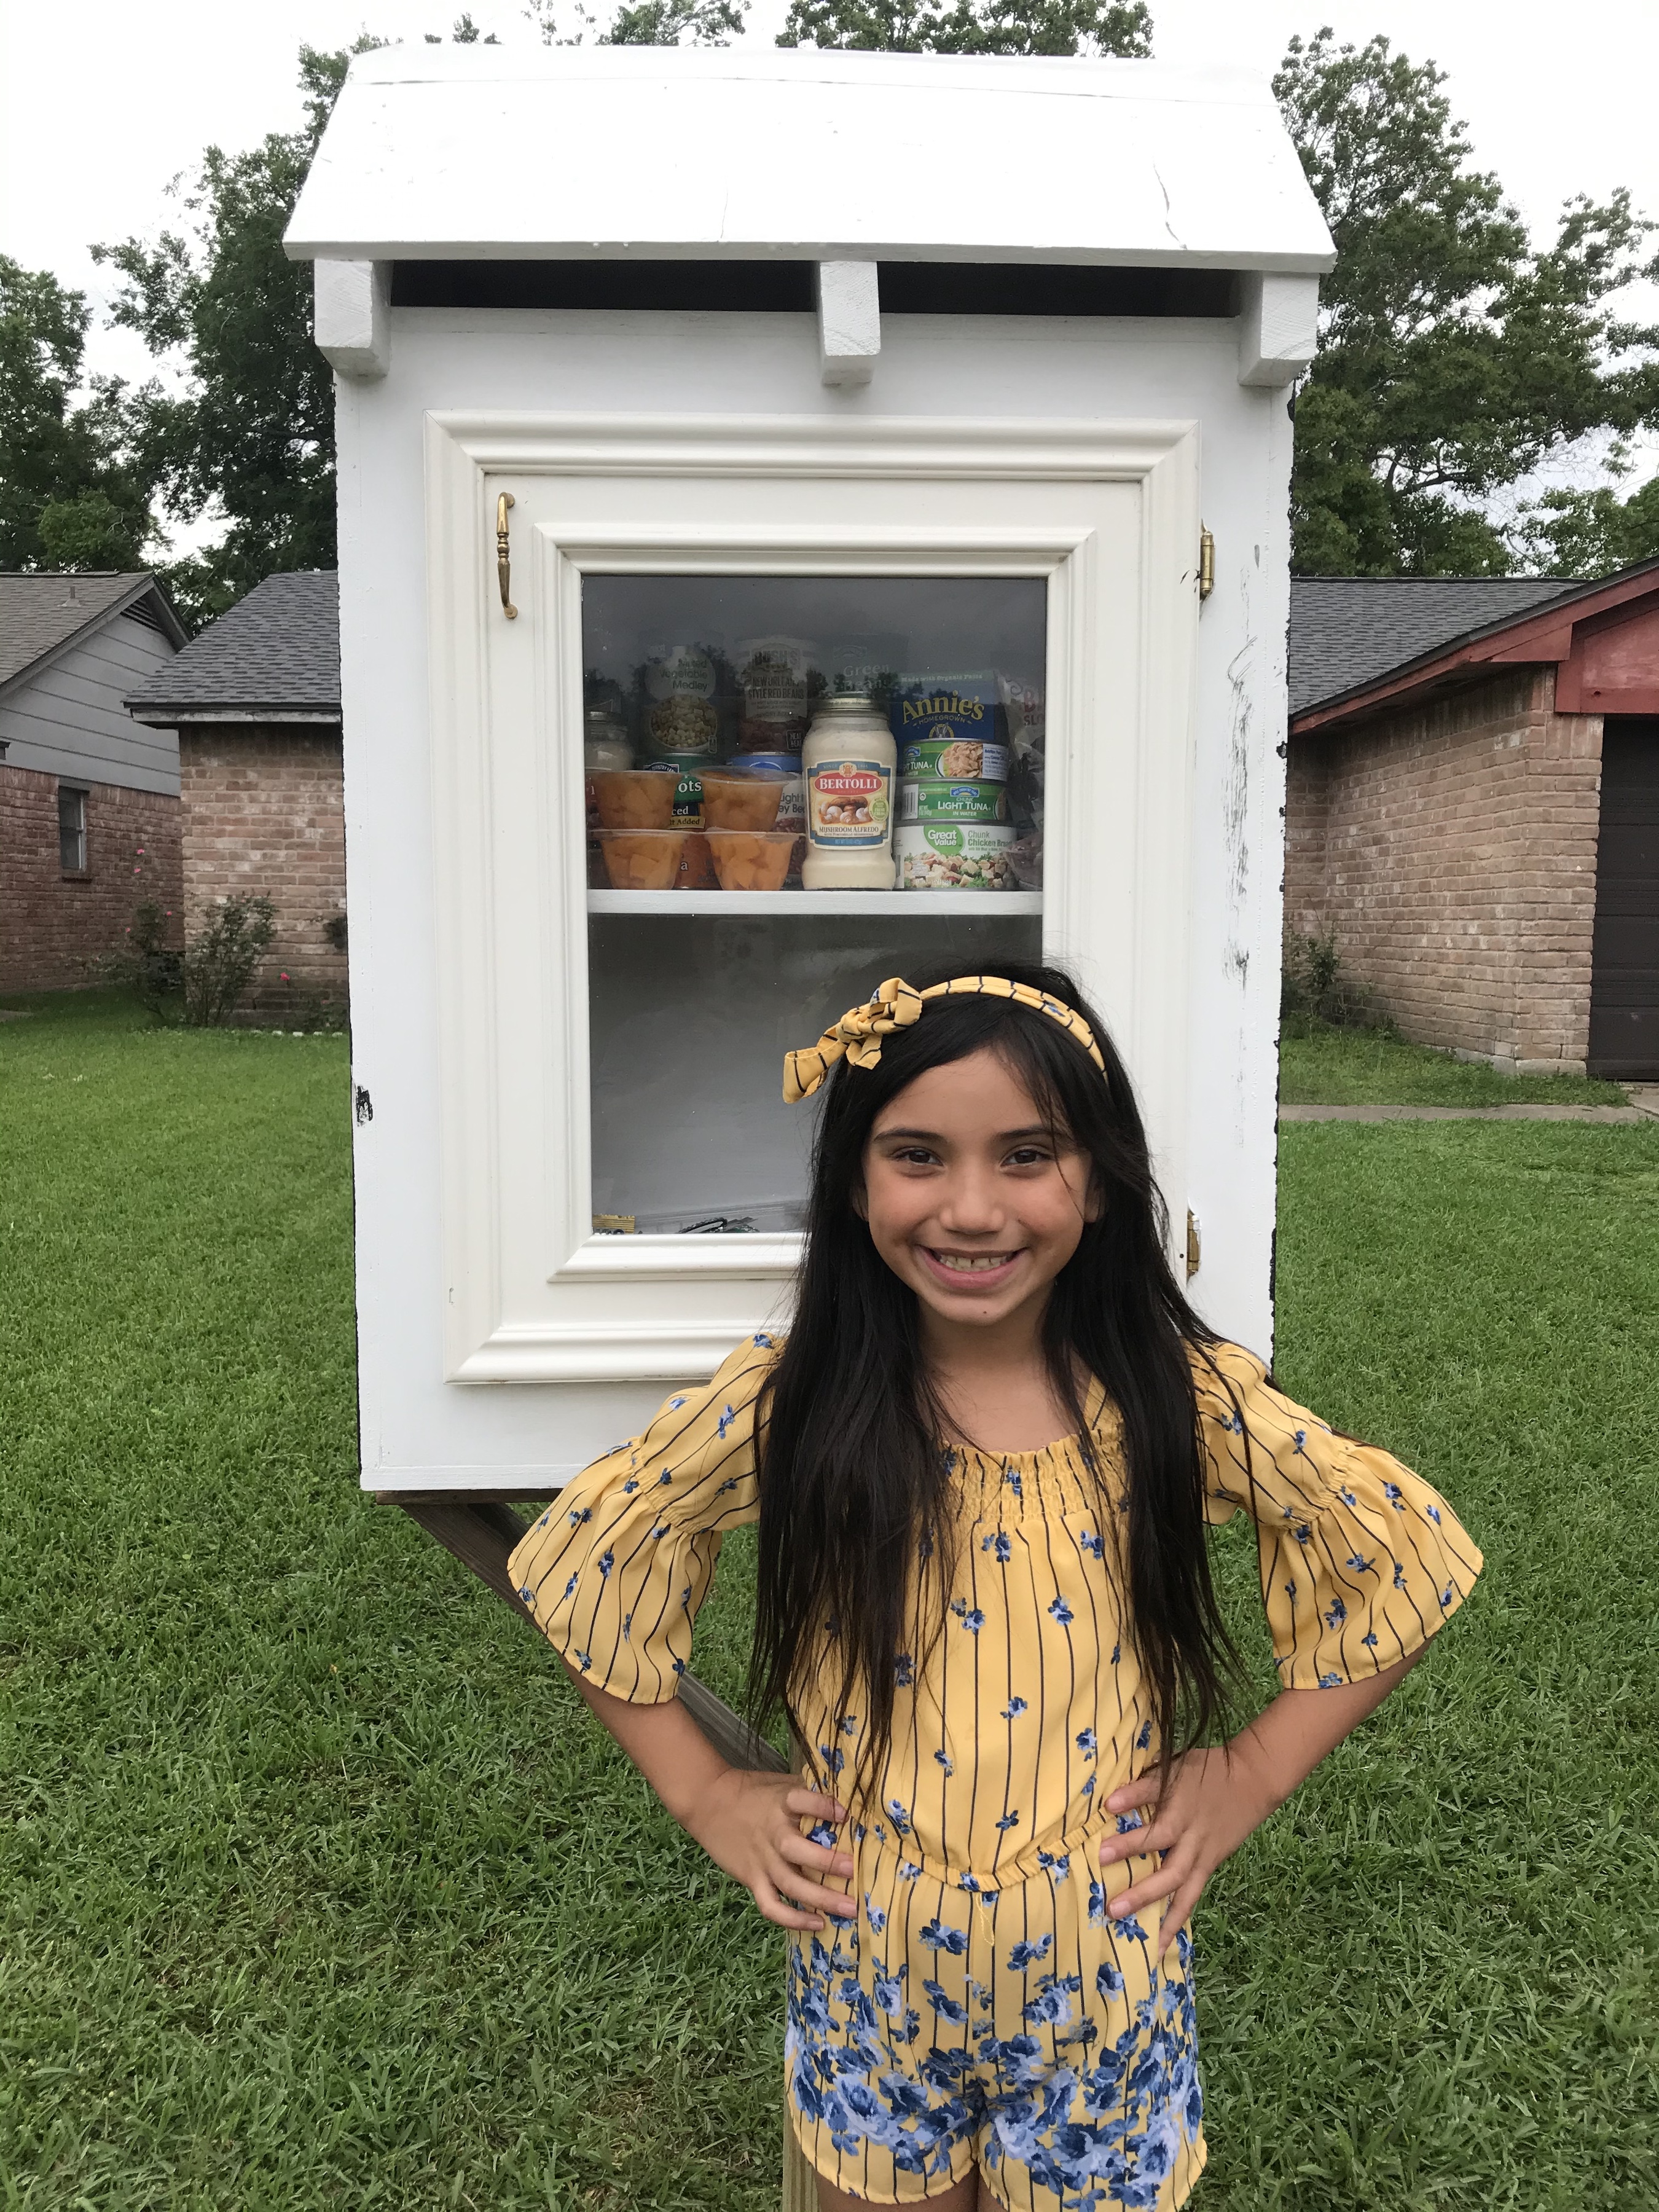 Friendswood Little Free Pantry Photo 1